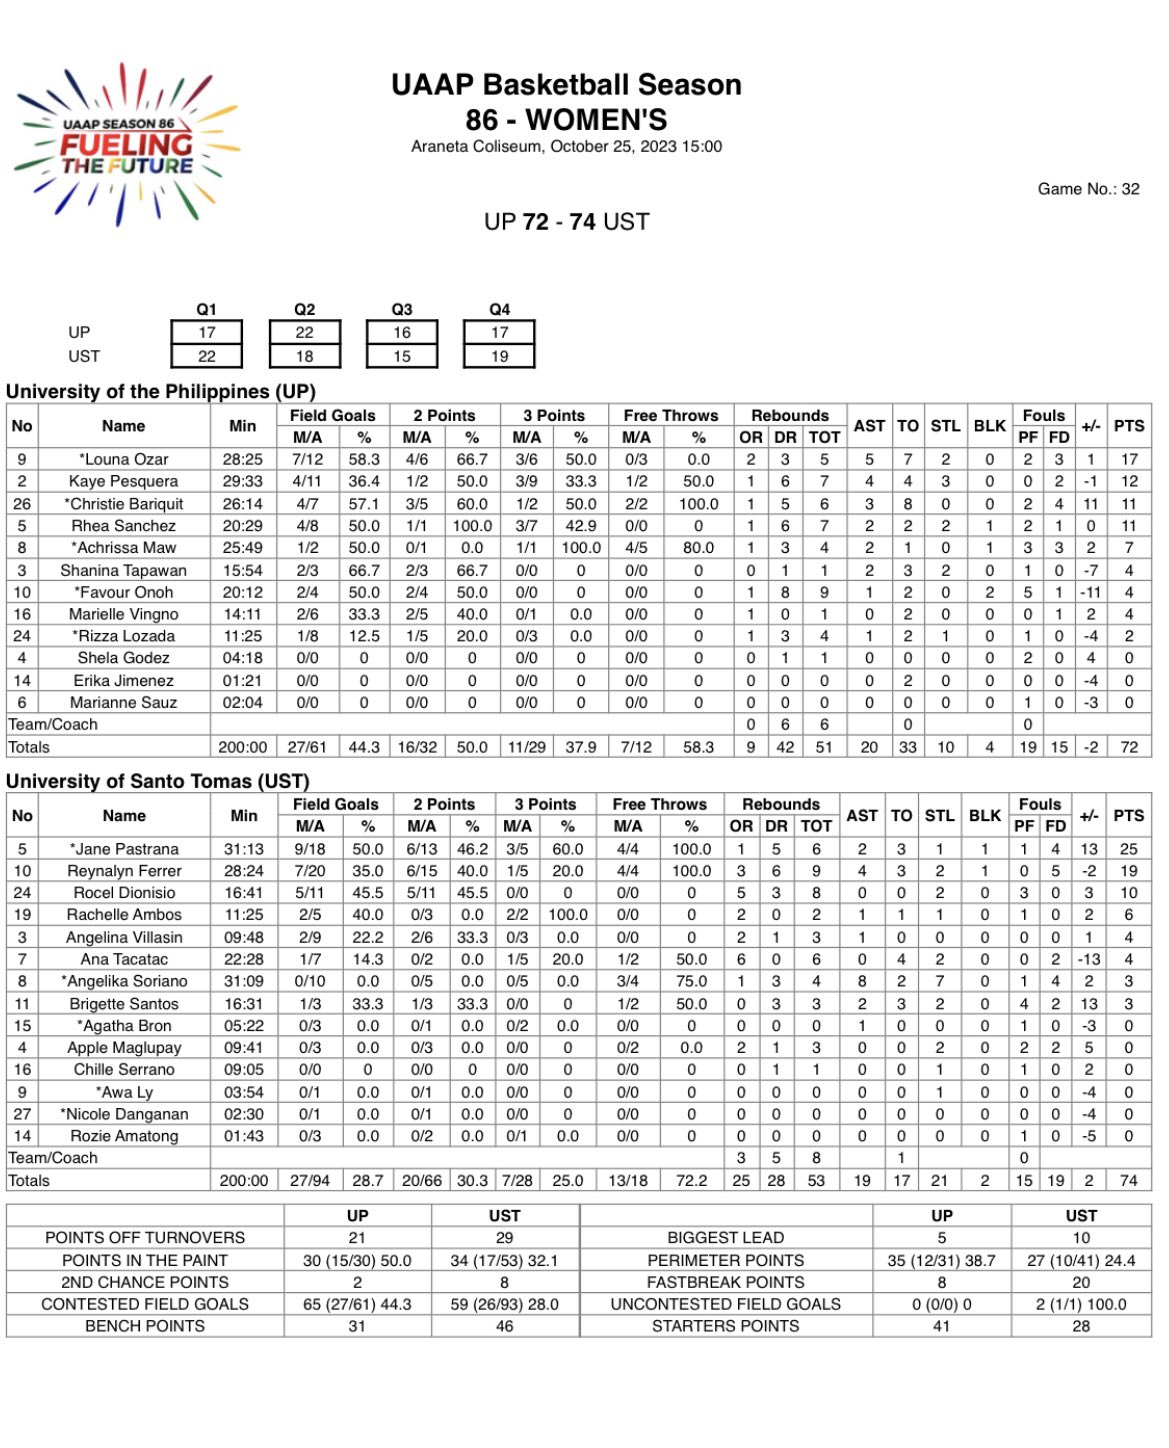 1025 G32 WOMENS UP UST